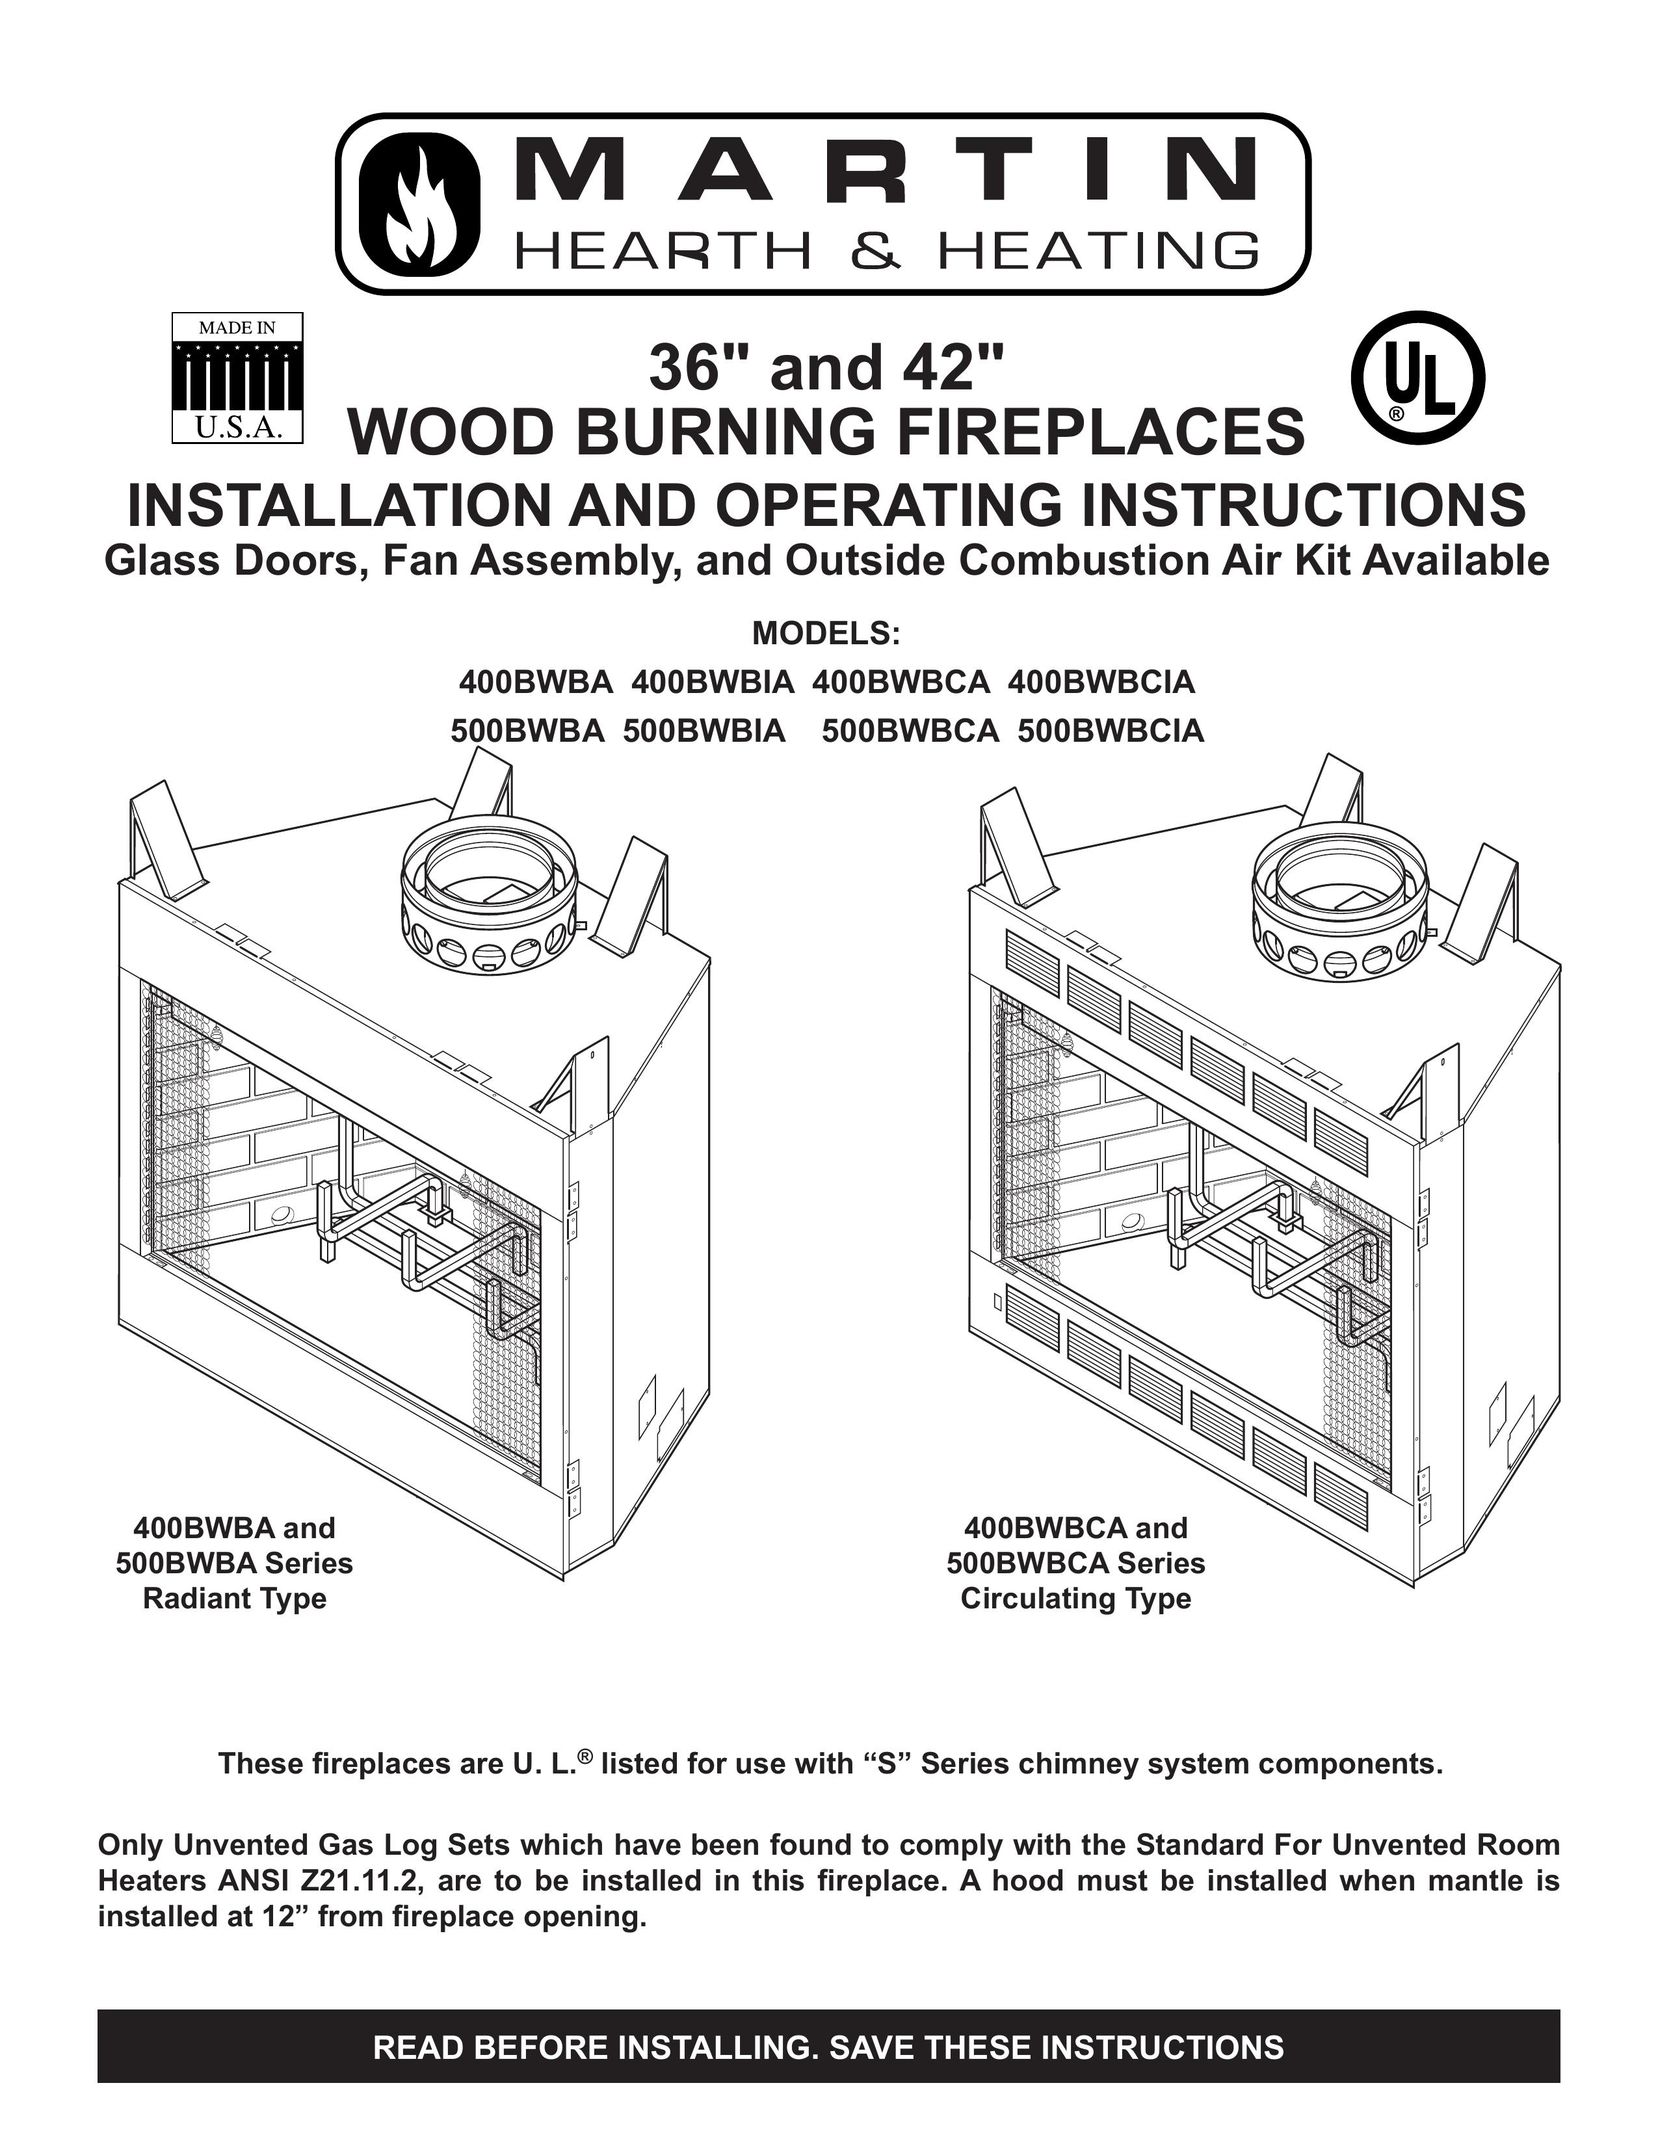 Martin Fireplaces 400BWBIA Indoor Fireplace User Manual